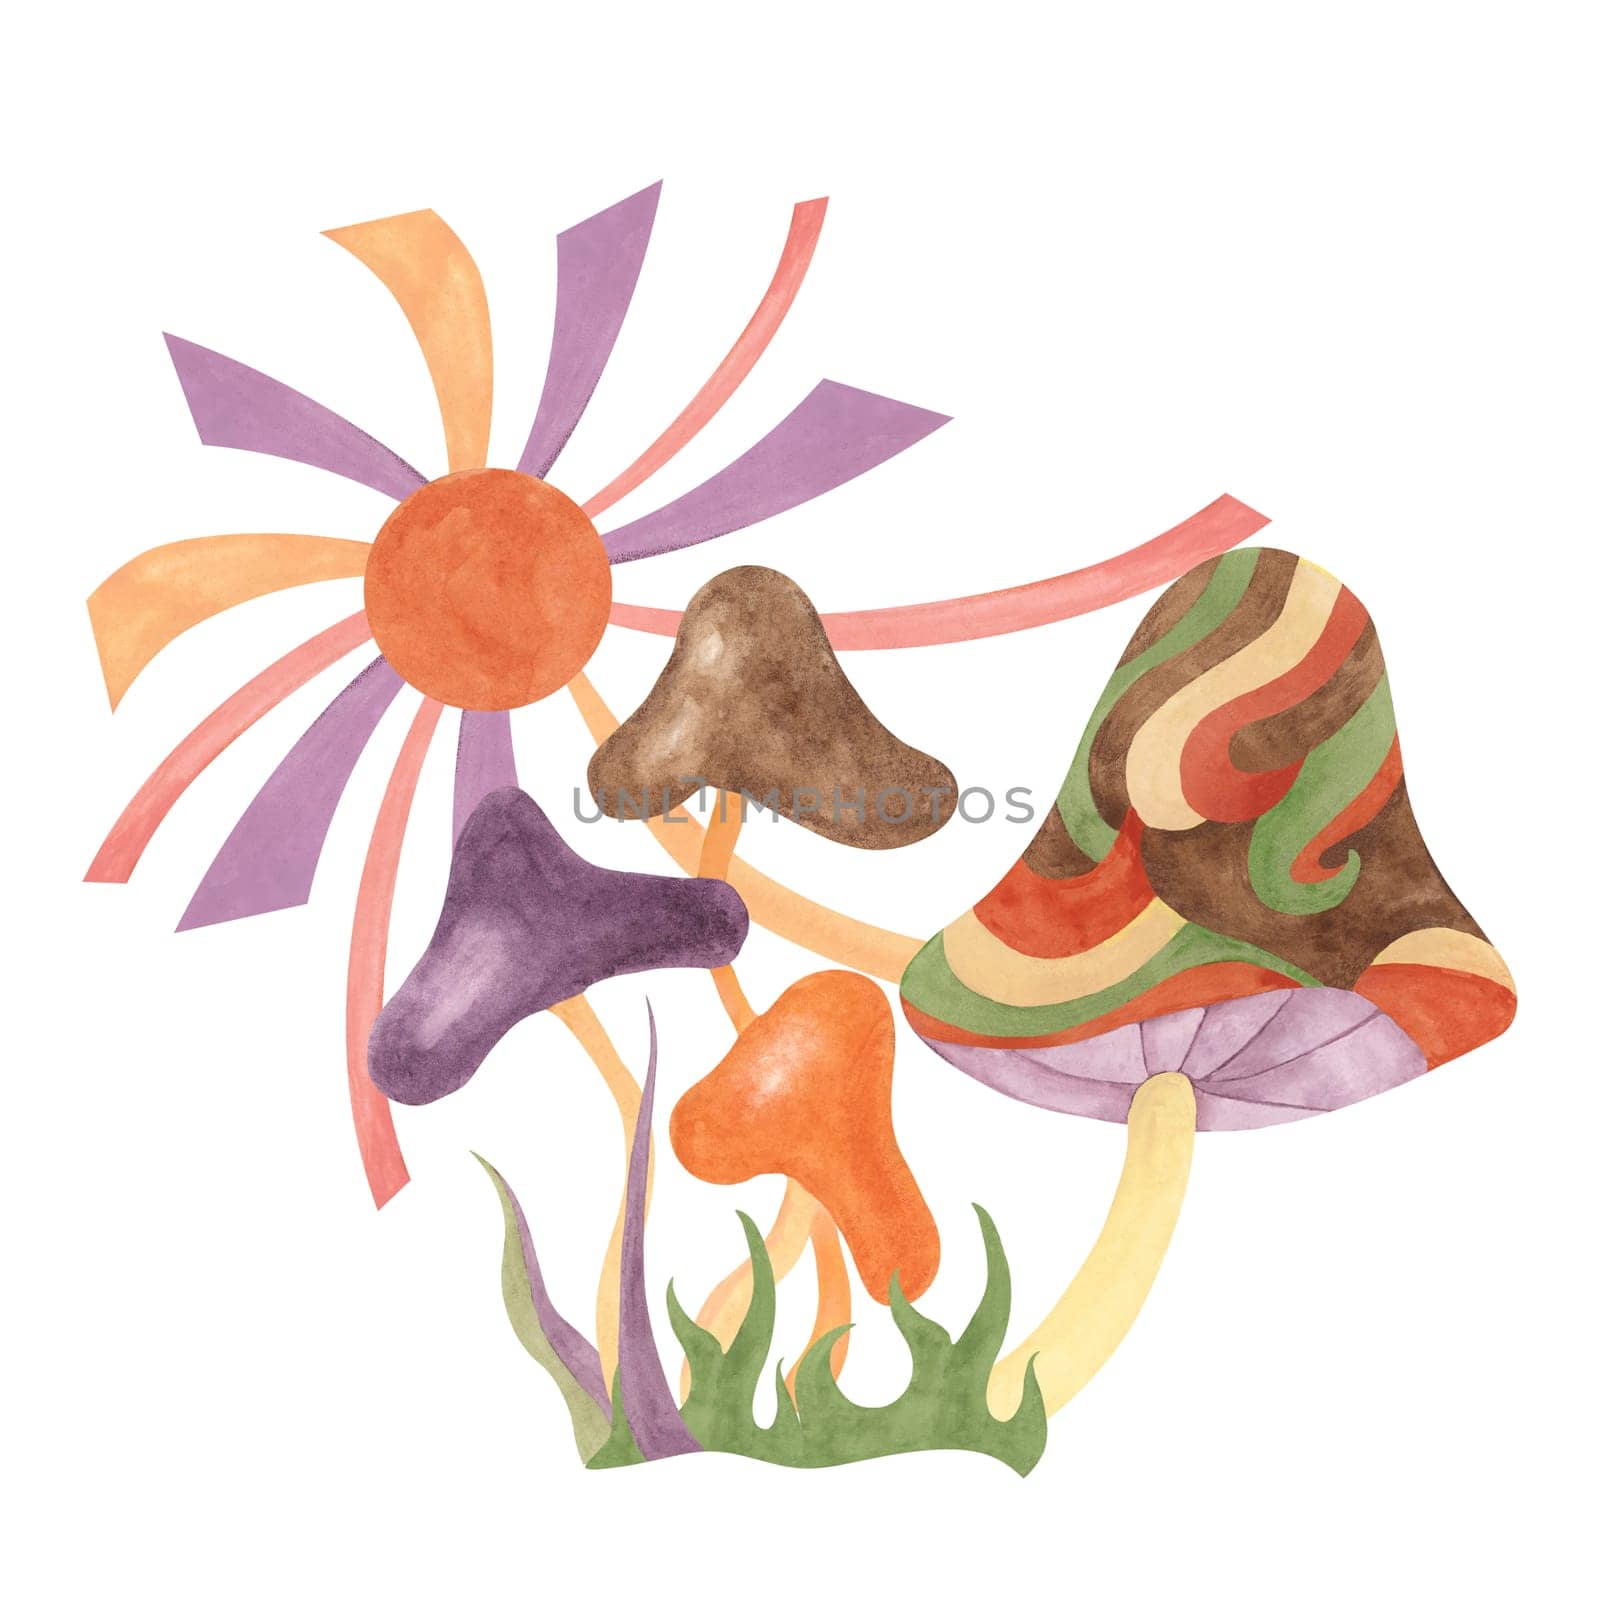 Retro hippie mushrooms and sun in 1970s style. Hippie psychedelic groovy fungus cliparts. Watercolor groovy illustration for printing cartoon style by Fofito